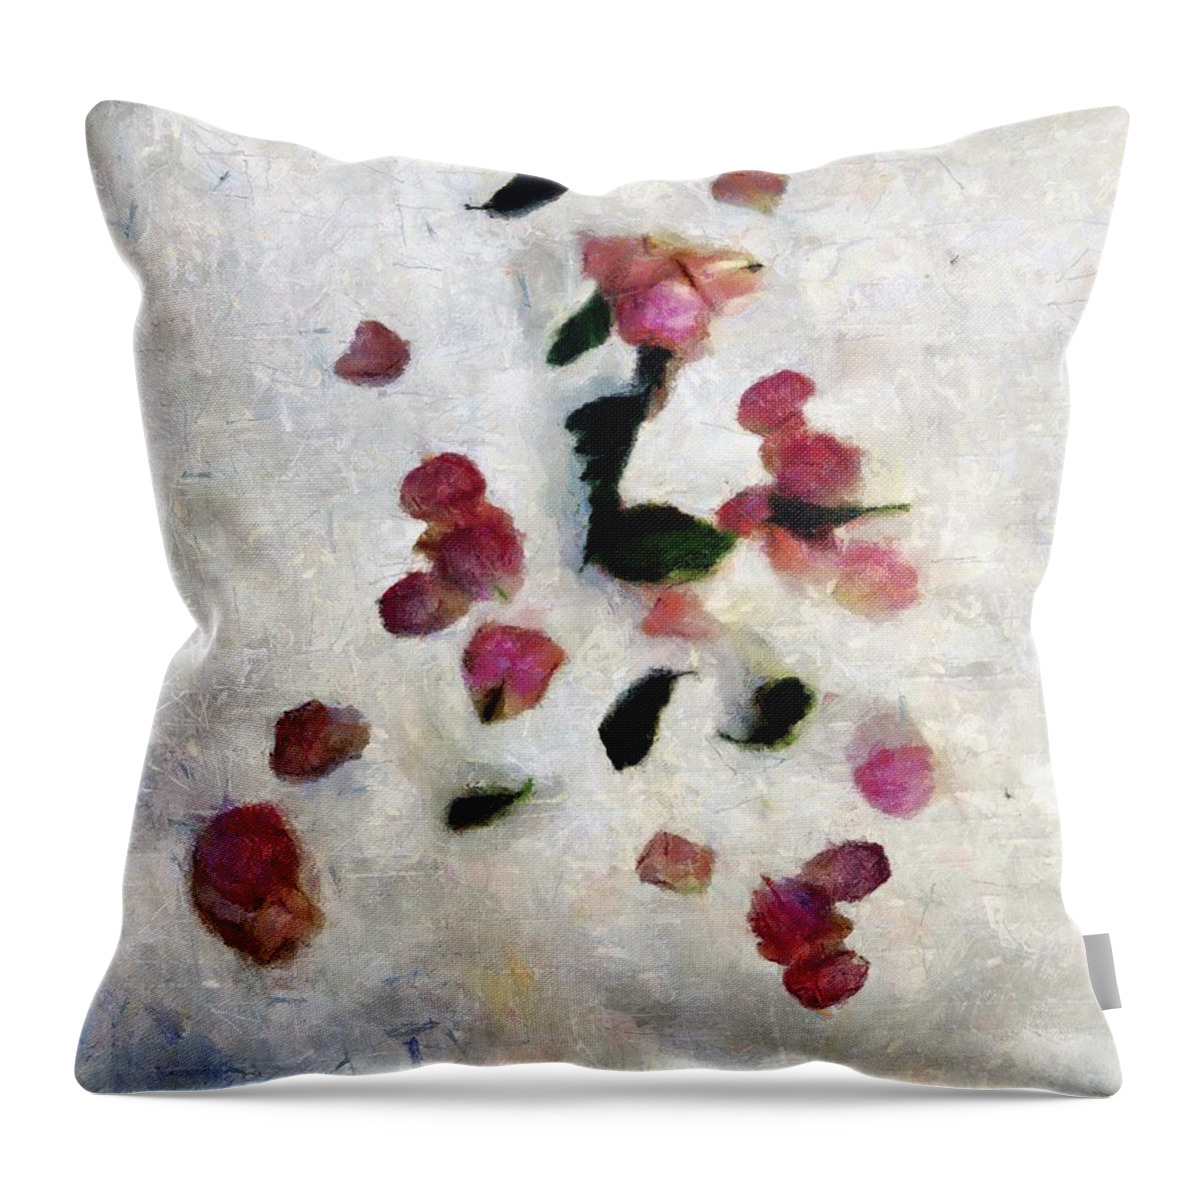 Snow Throw Pillow featuring the painting Rosepetal Runes by RC DeWinter